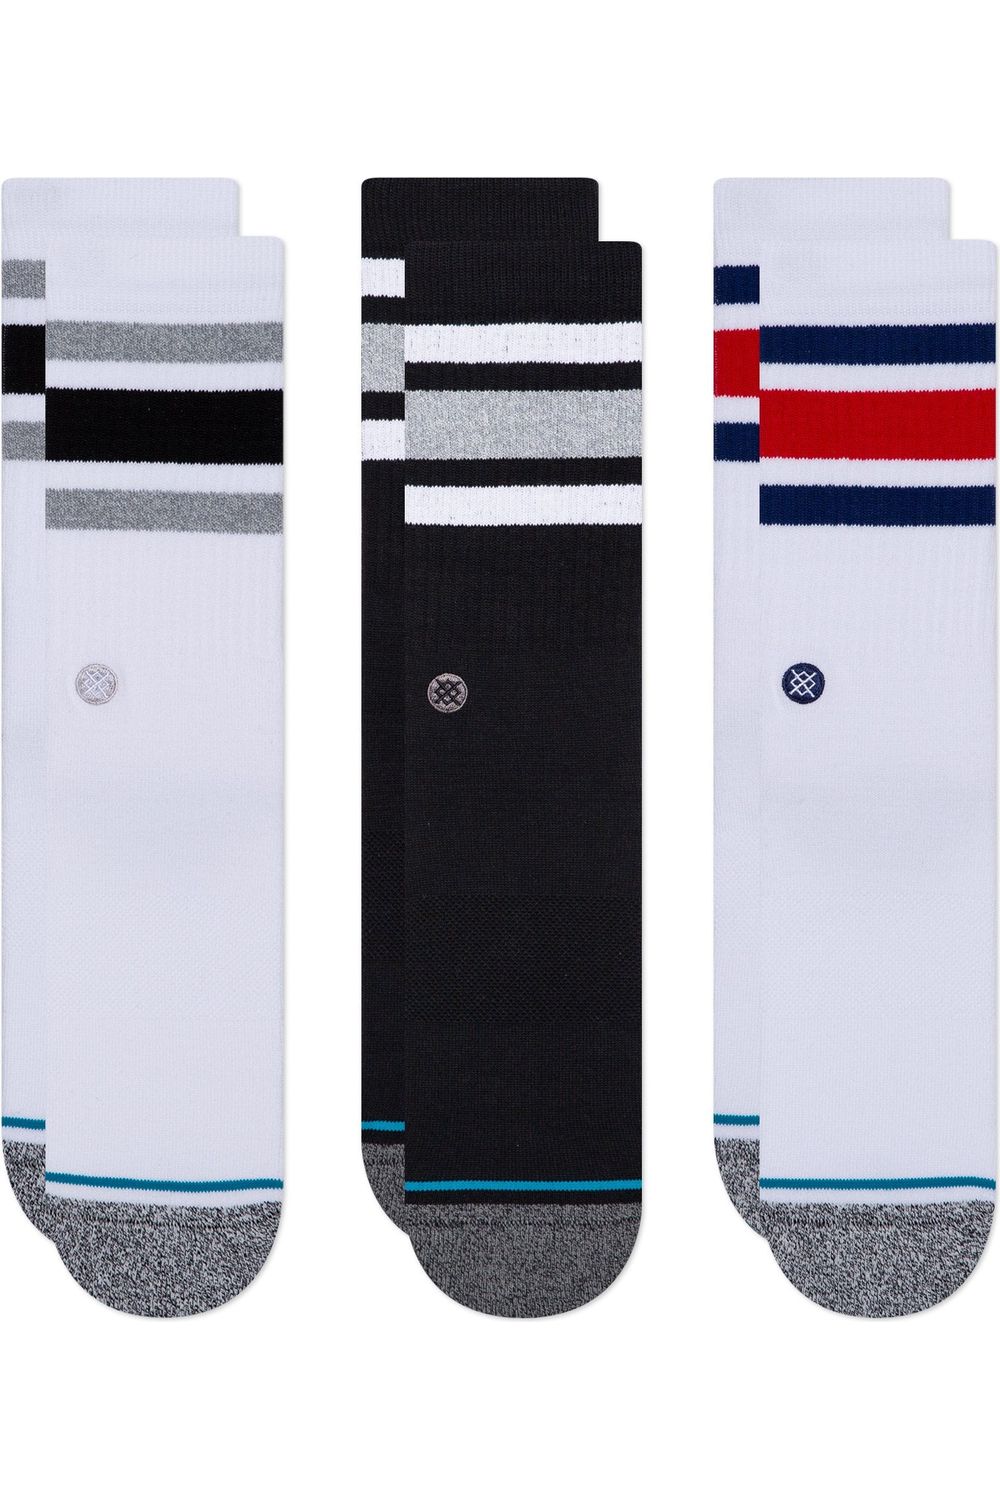 Stance The Boyd 3 Pack